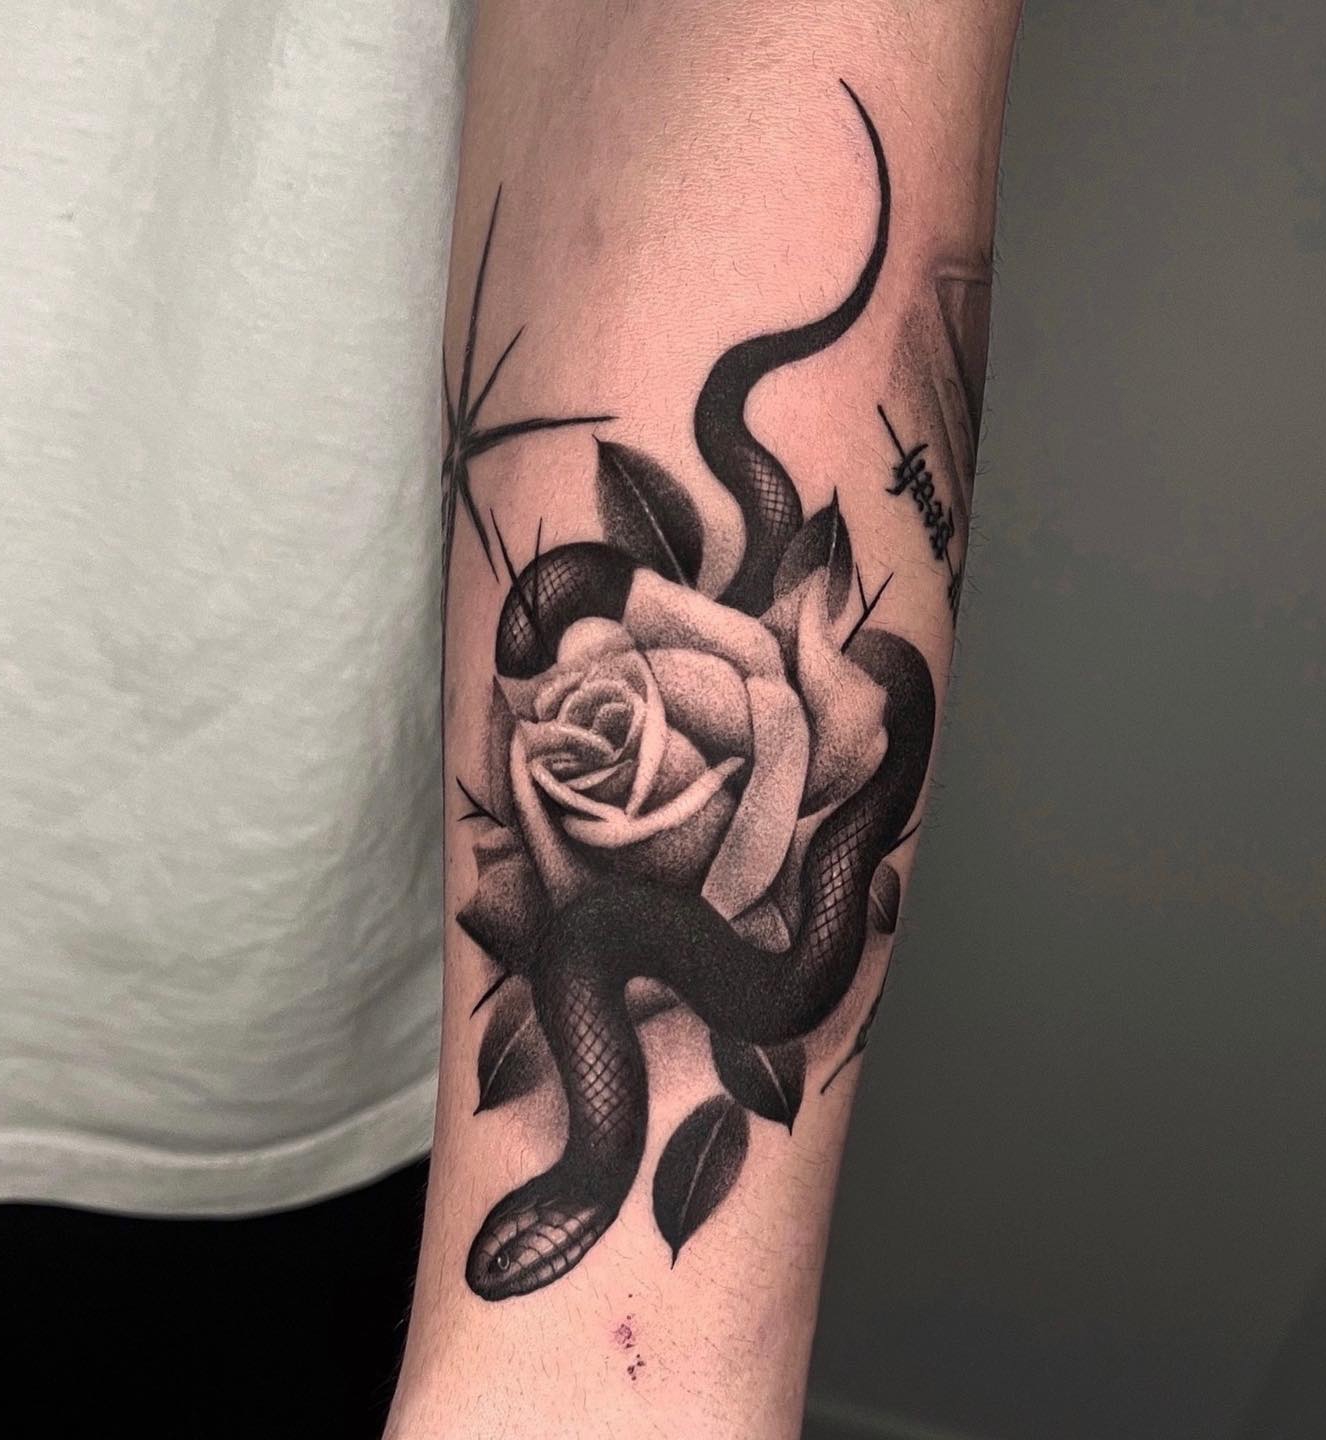 Black Snake and Rose Tattoo on Arm